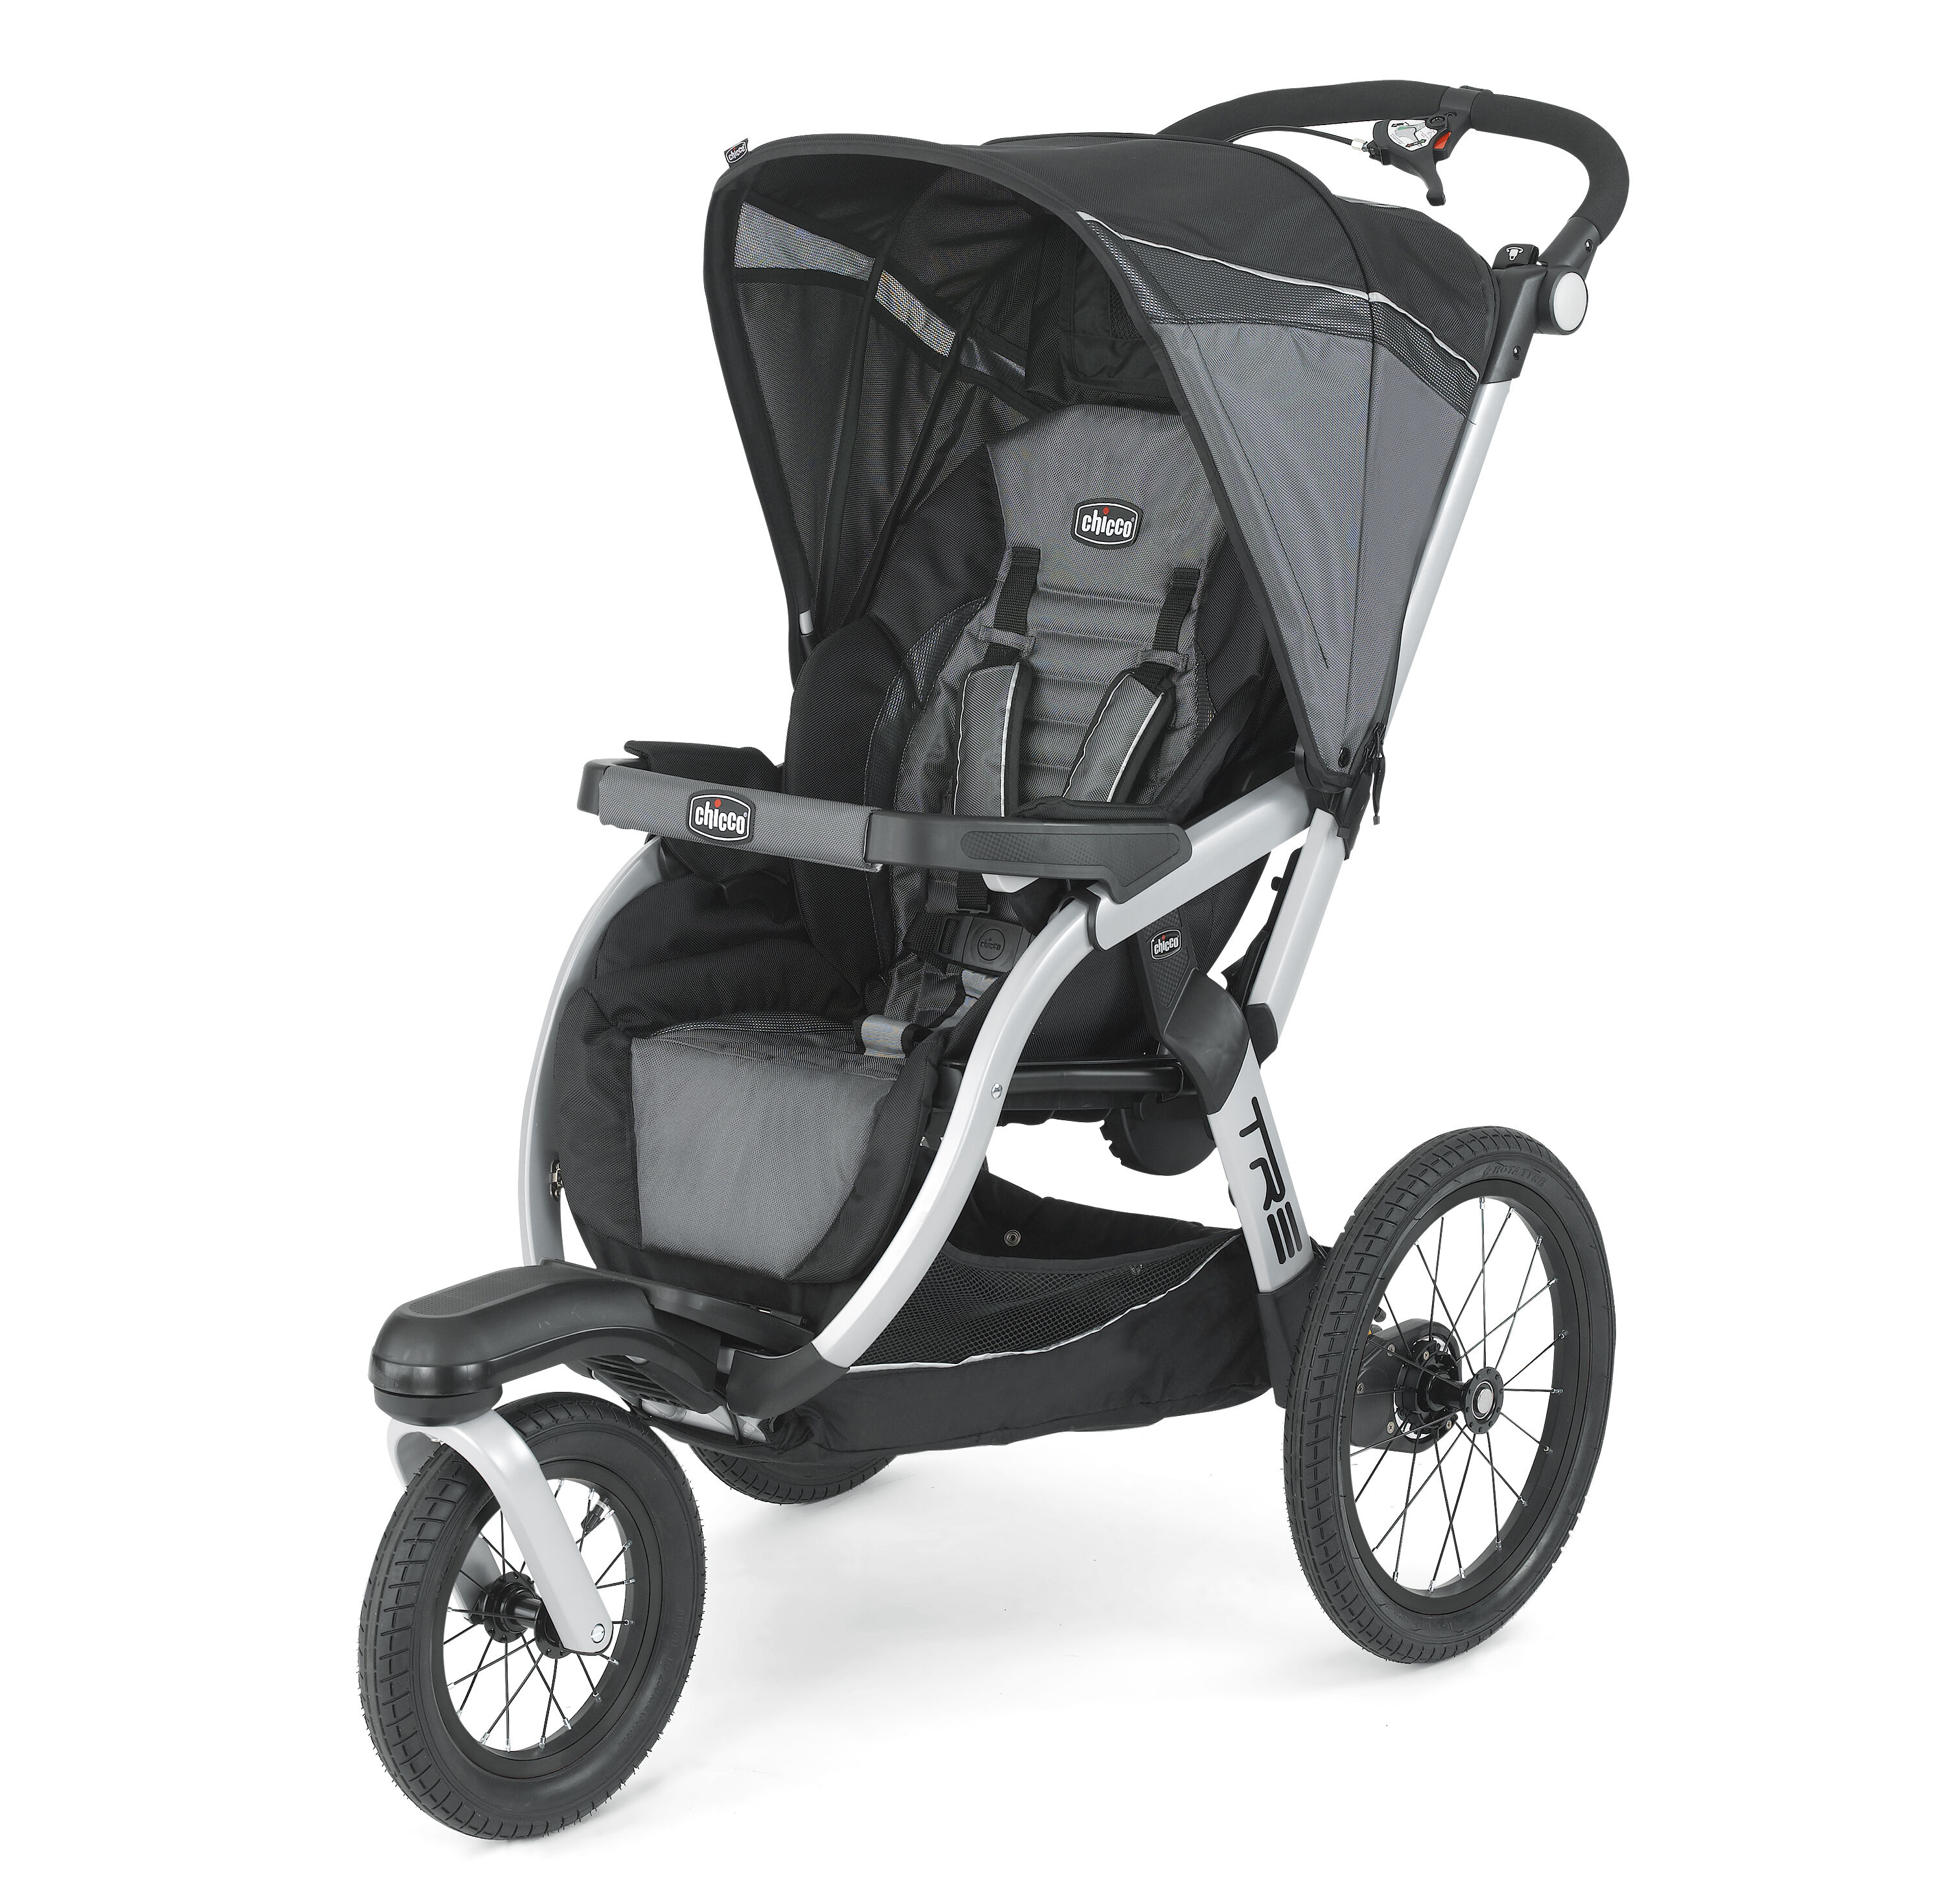 mico max 30 compatible strollers